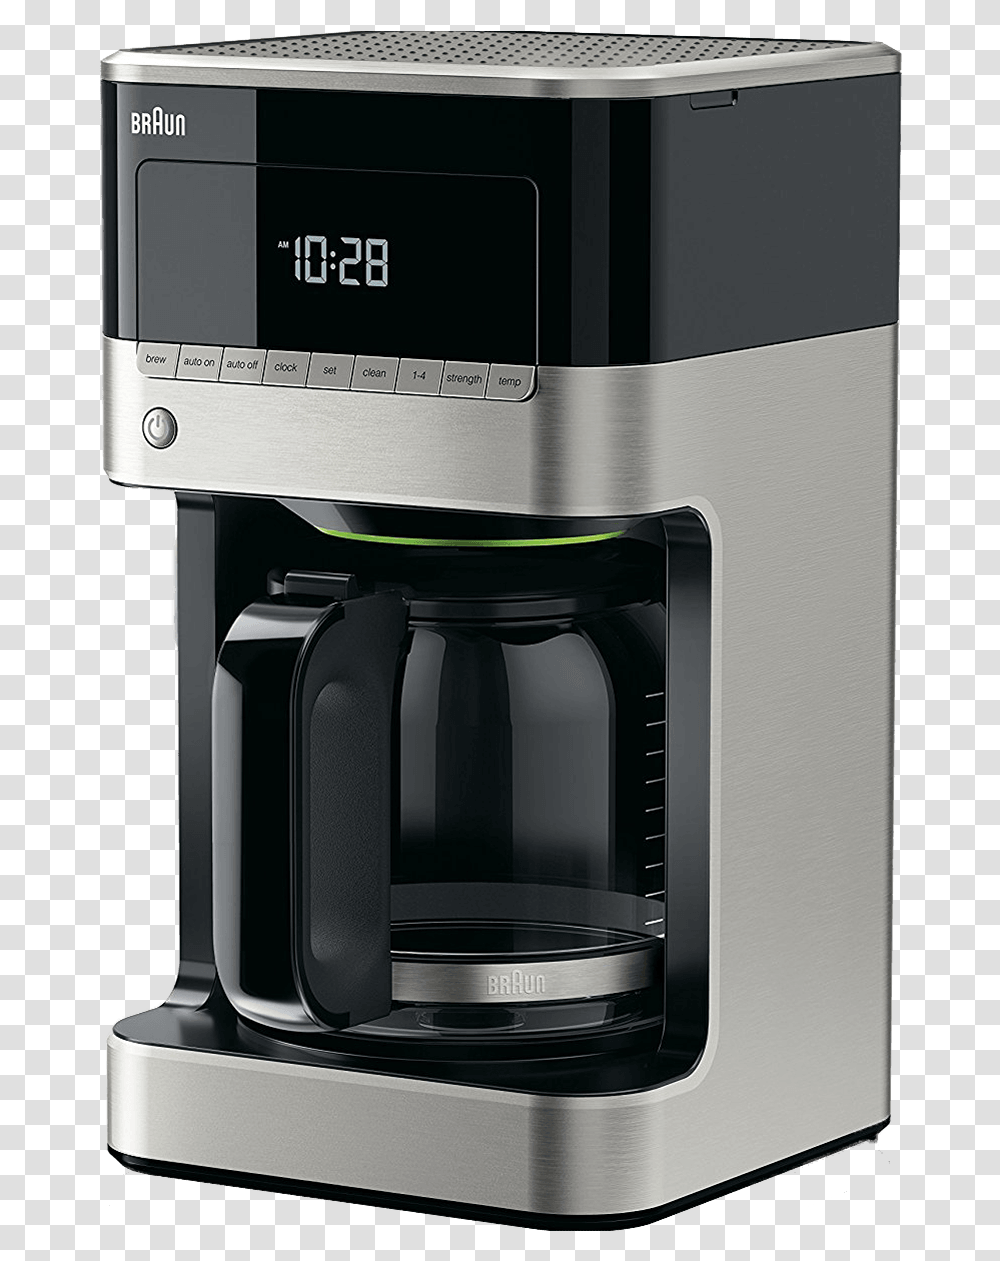 Braun Brewsense 12 Cup Drip Coffee Maker Braun Coffee Maker Clean Light, Appliance, Microwave, Oven, Coffee Cup Transparent Png